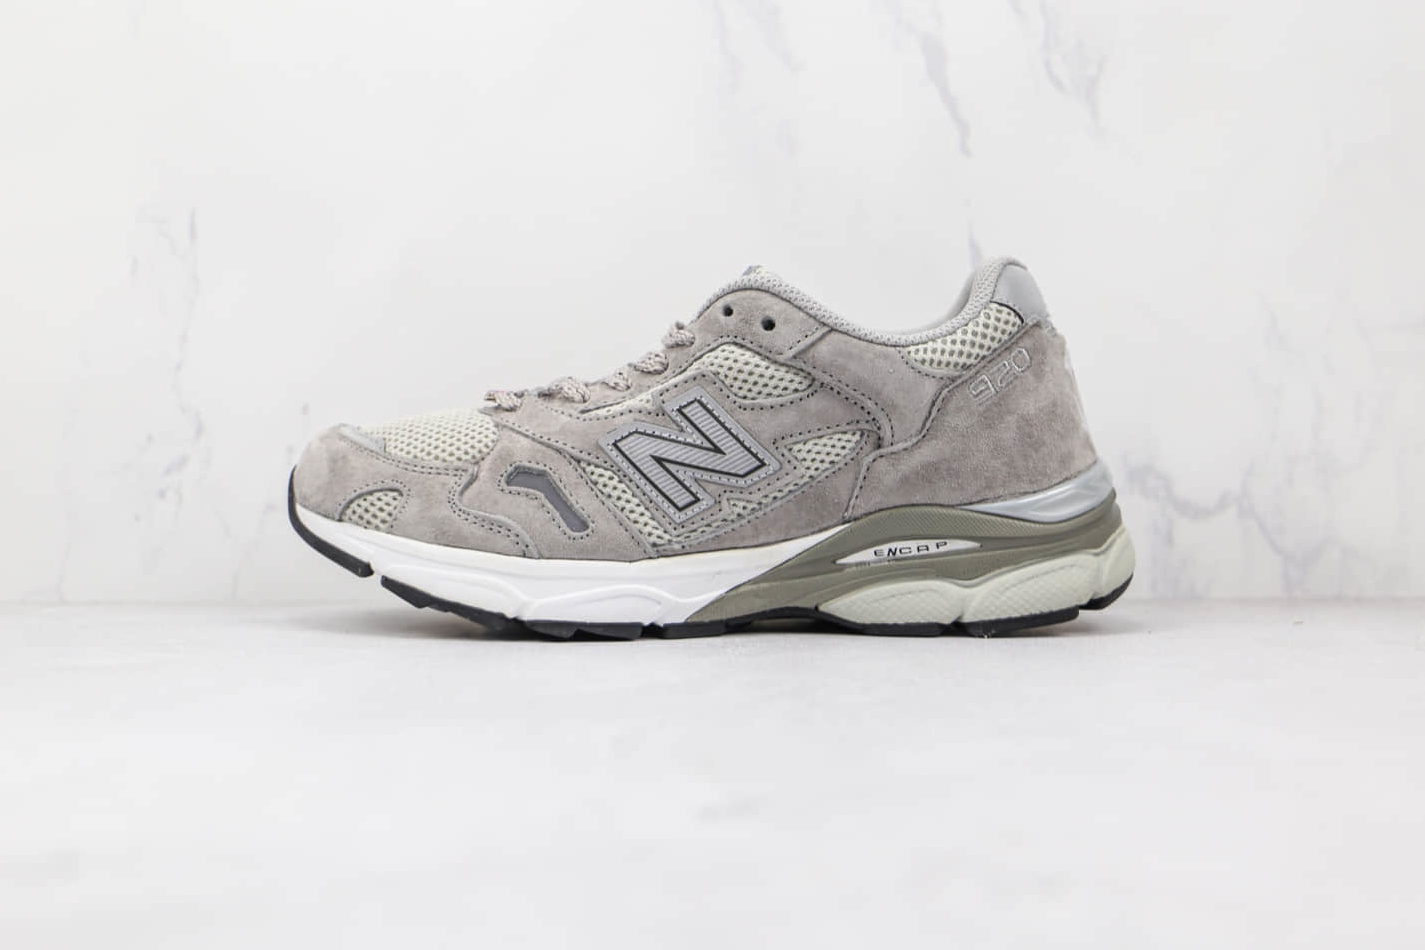 New Balance MTA X 920 Made In England 'NYC Subway' M920MTA - Authentic Style At Its Best